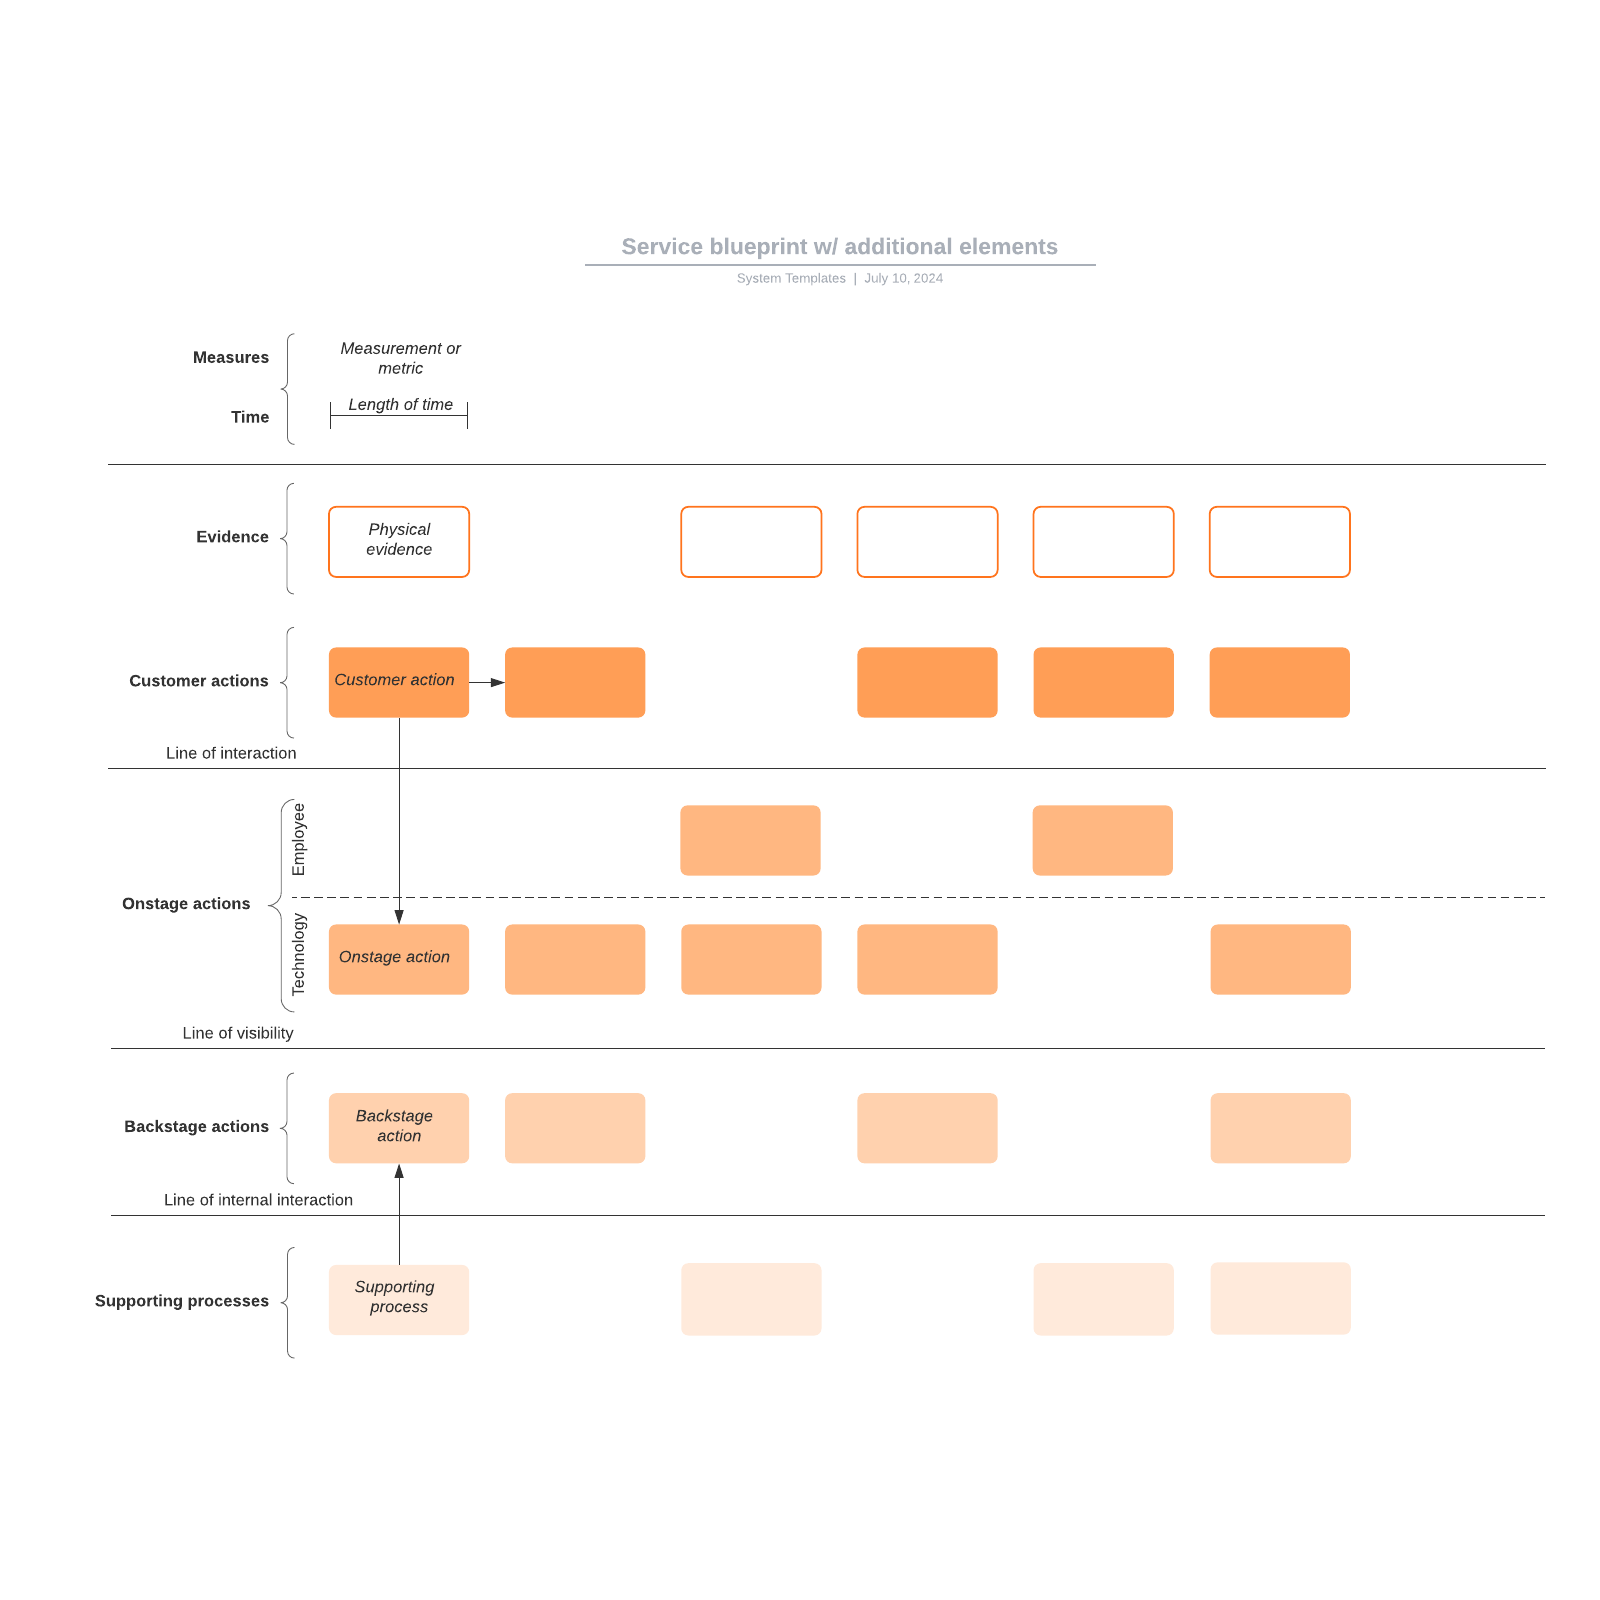 Service blueprint w/ additional elements example